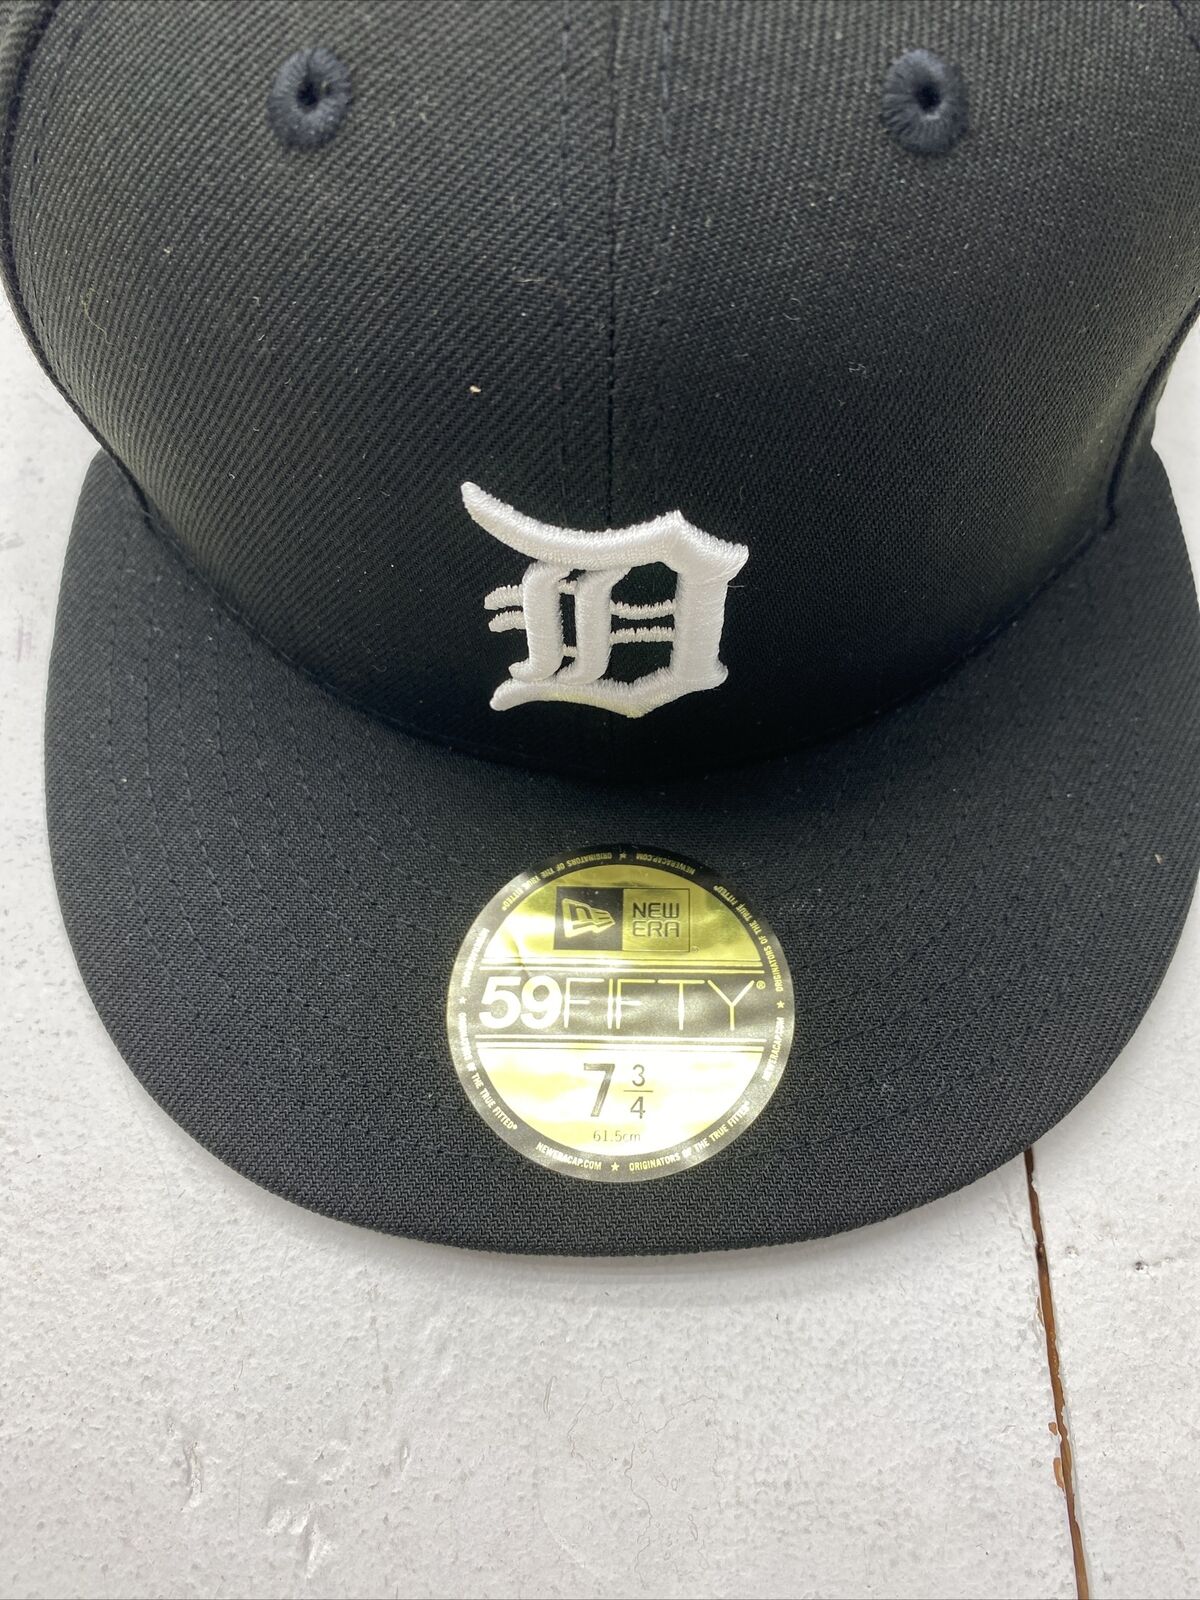 Detroit Tigers ￼New Era Black White 59Fifty MLB Fitted Hat Size 7